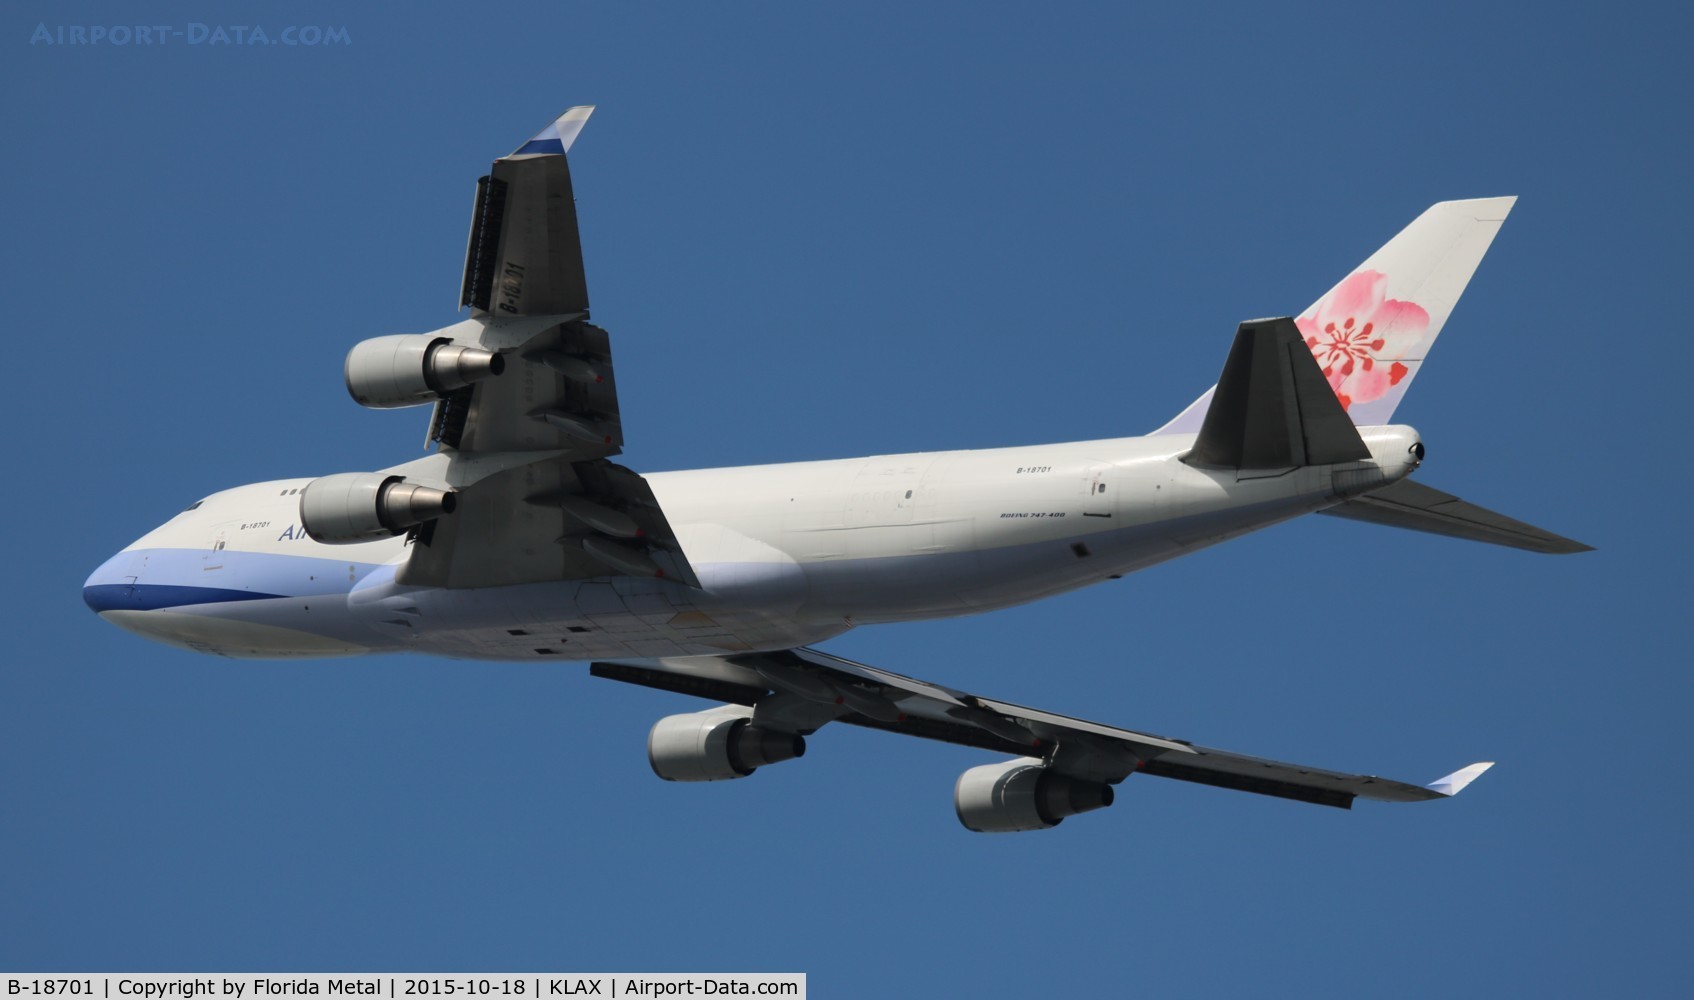 B-18701, 2000 Boeing 747-409F/SCD C/N 30759, China Airlines Cargo 747-400F zx